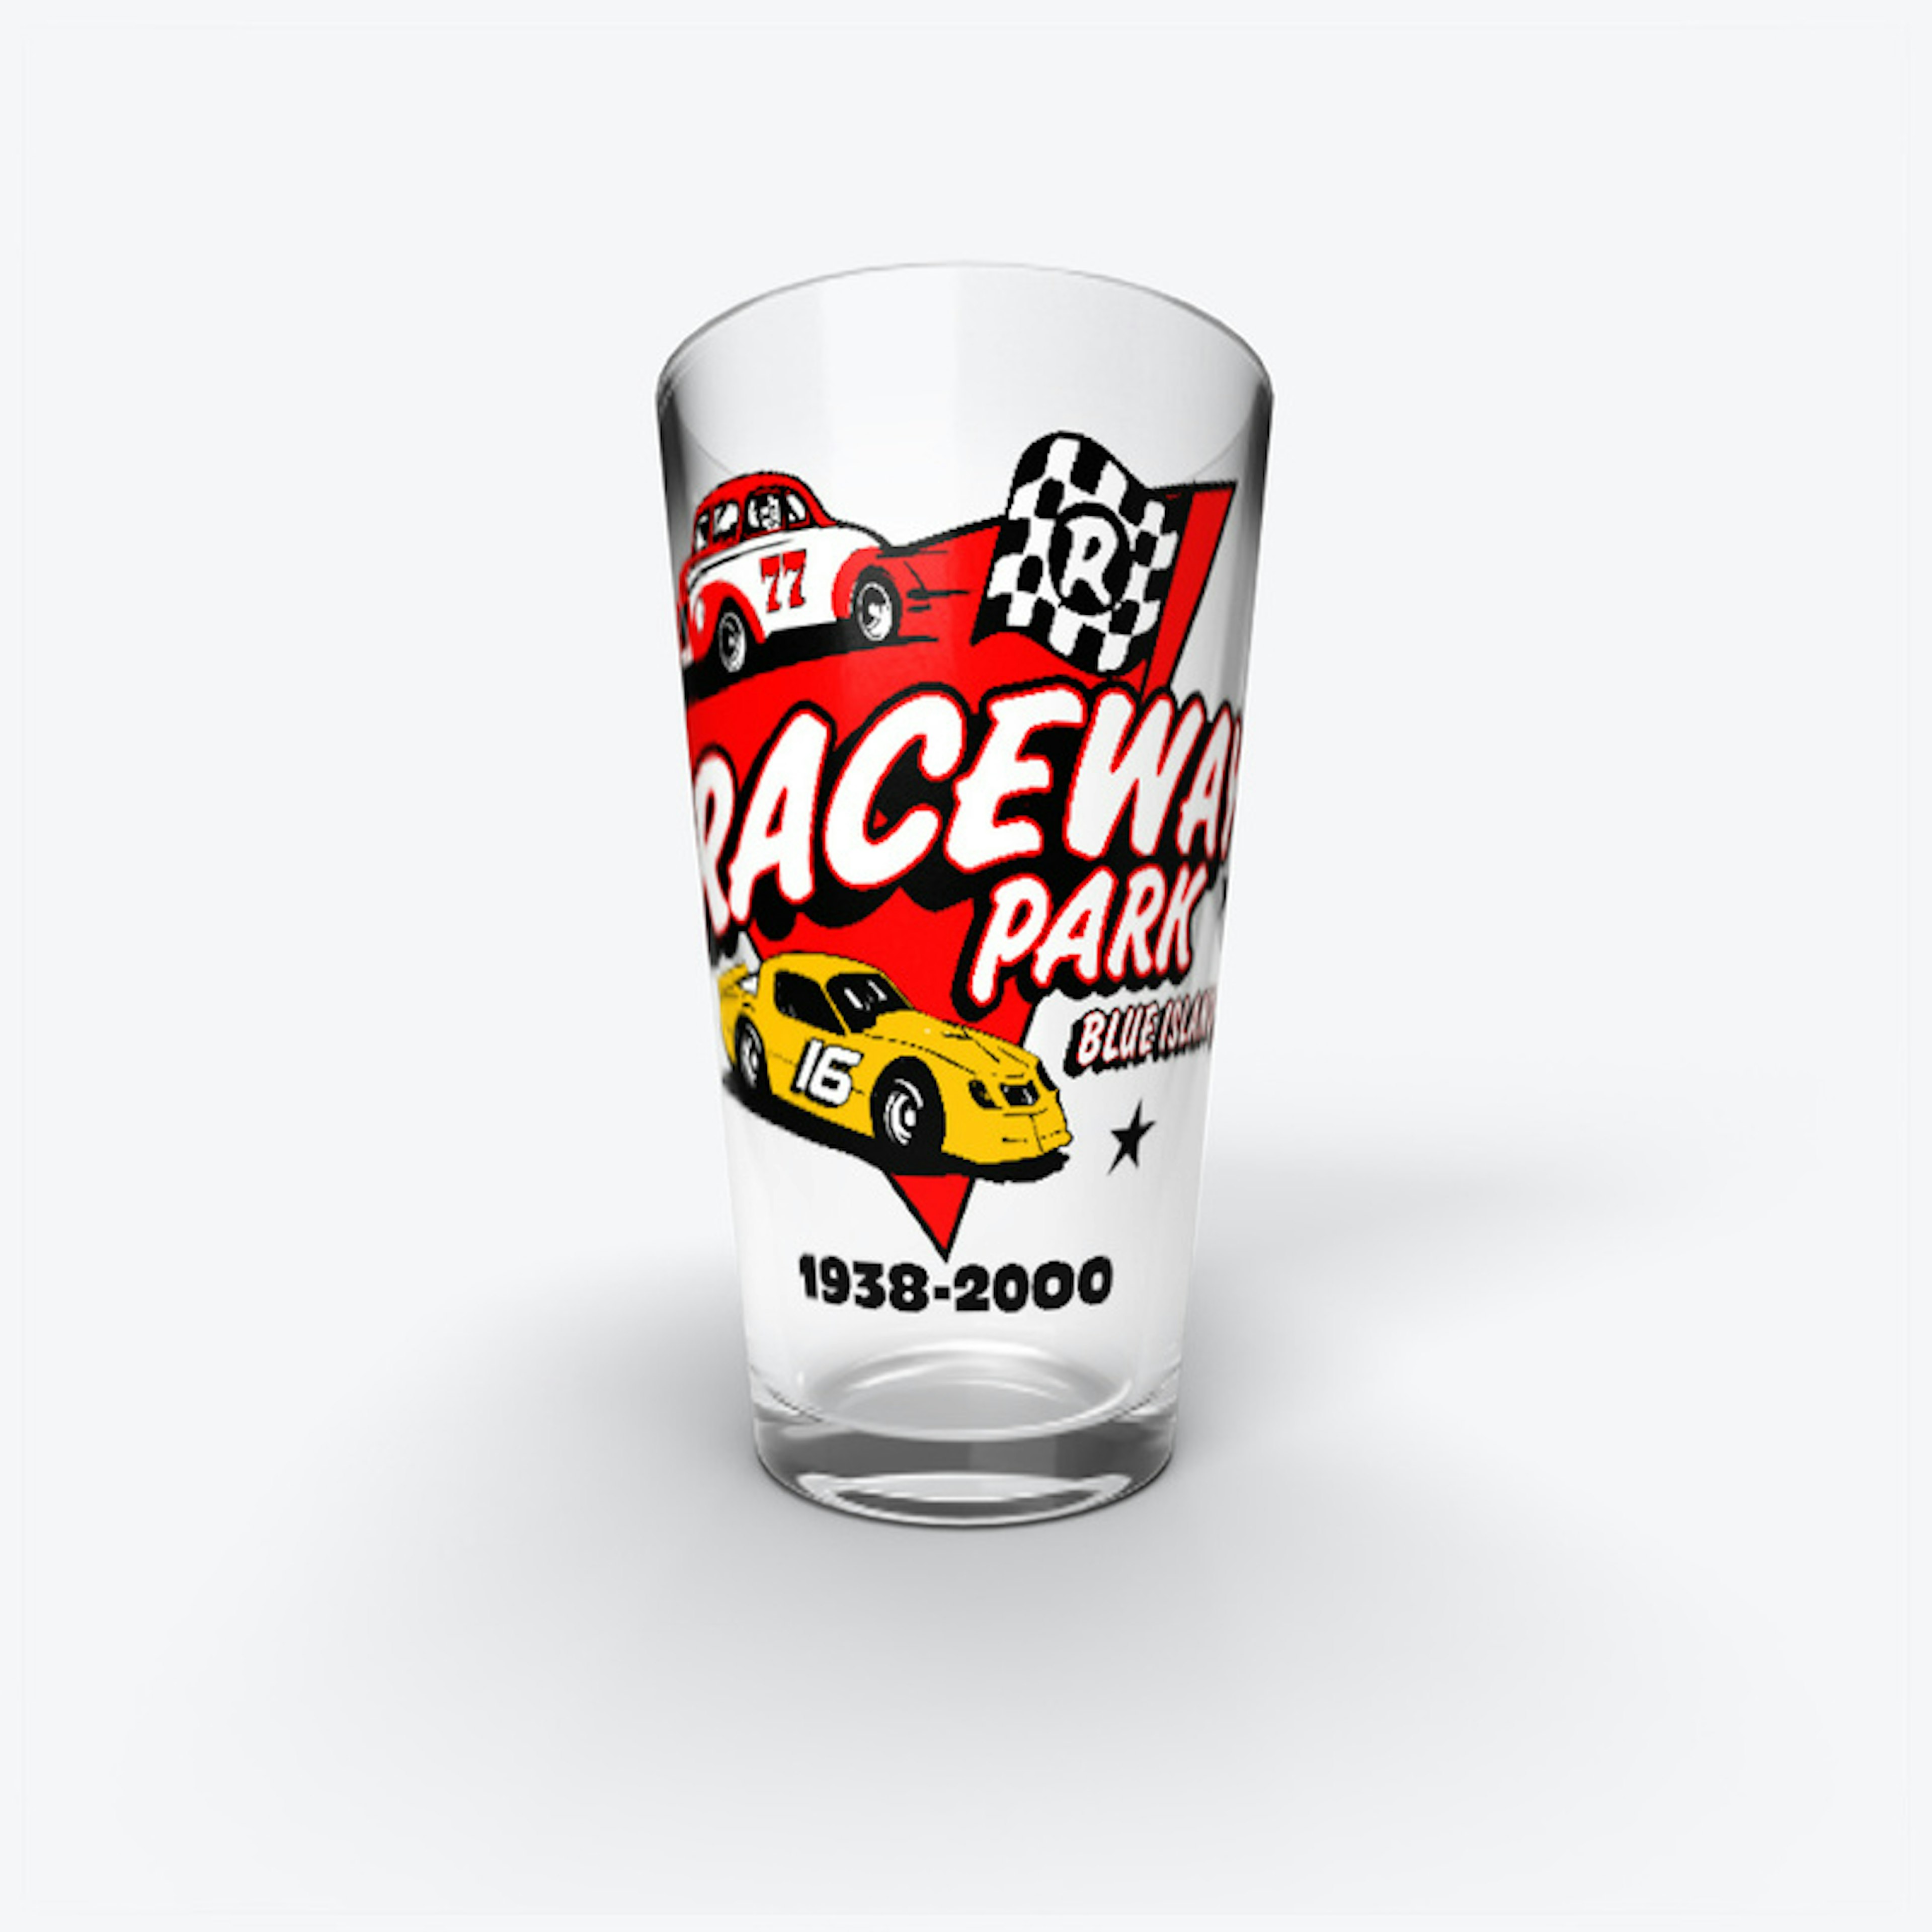 Raceway Park Pint Glass and More